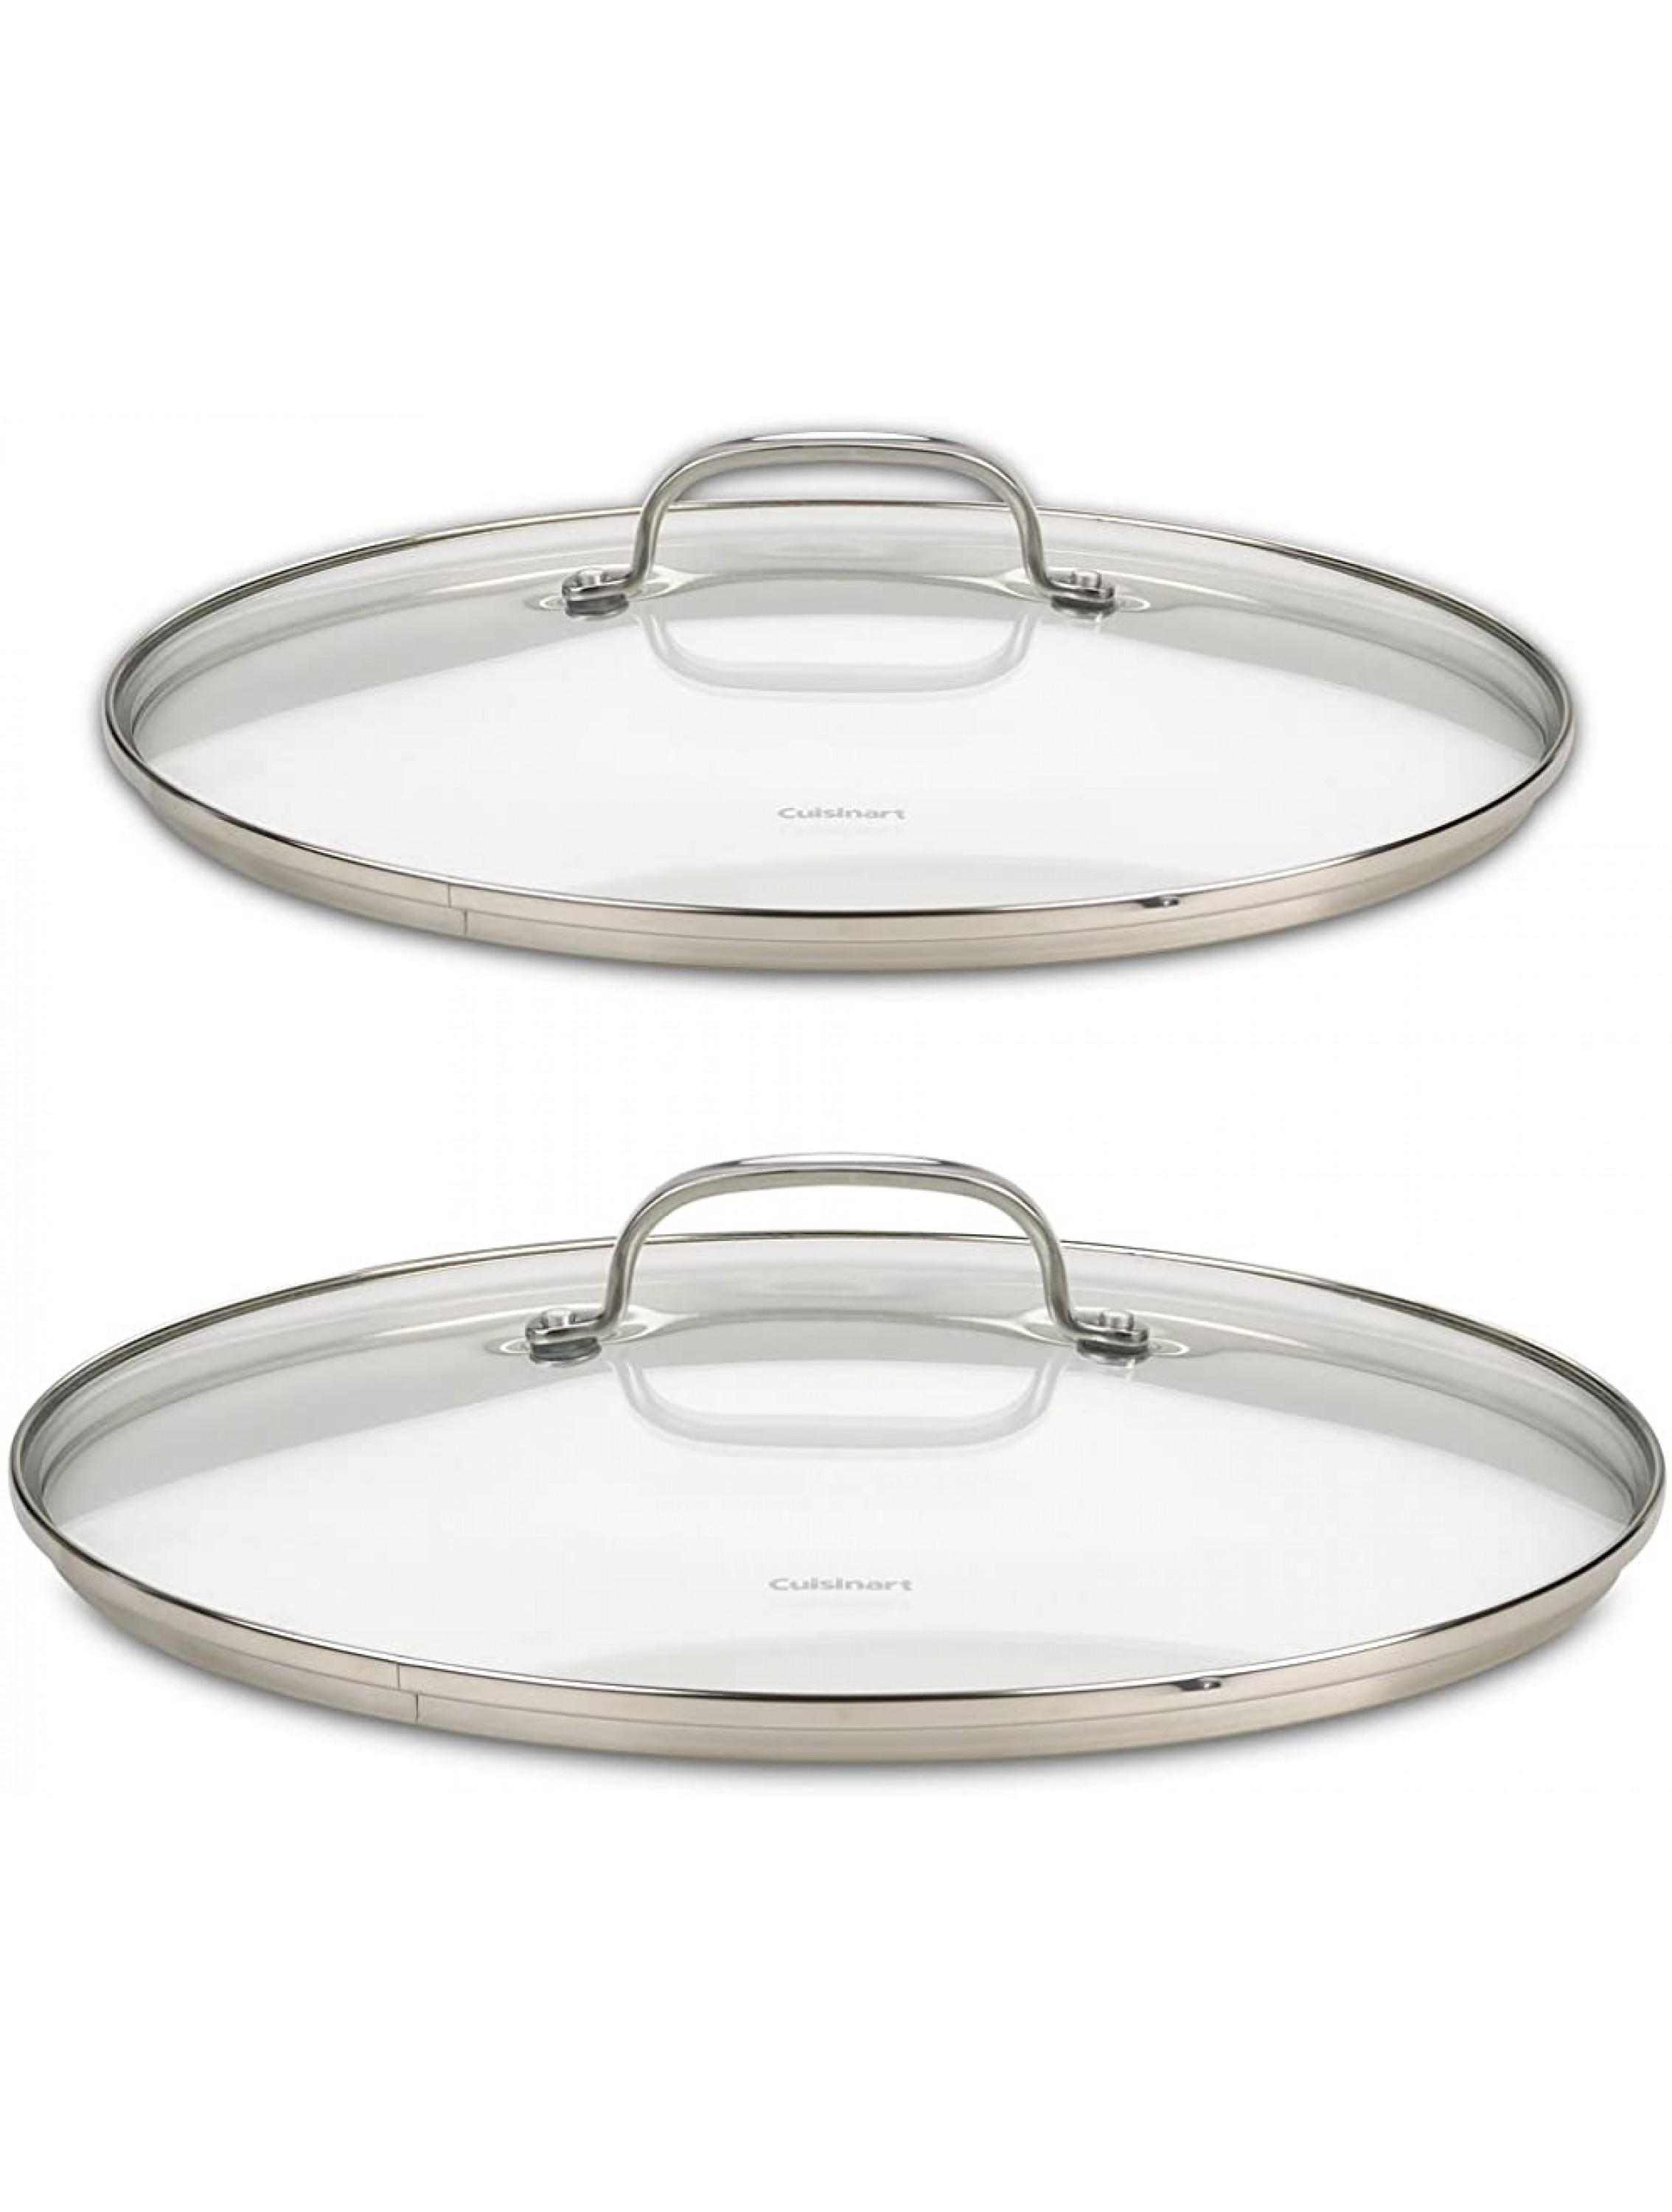 Cuisinart 71-2228CG Chef's Classic Stainless 2-Piece Glass Lid Set,9 & 11 Glass covers - B5ABH7CYW